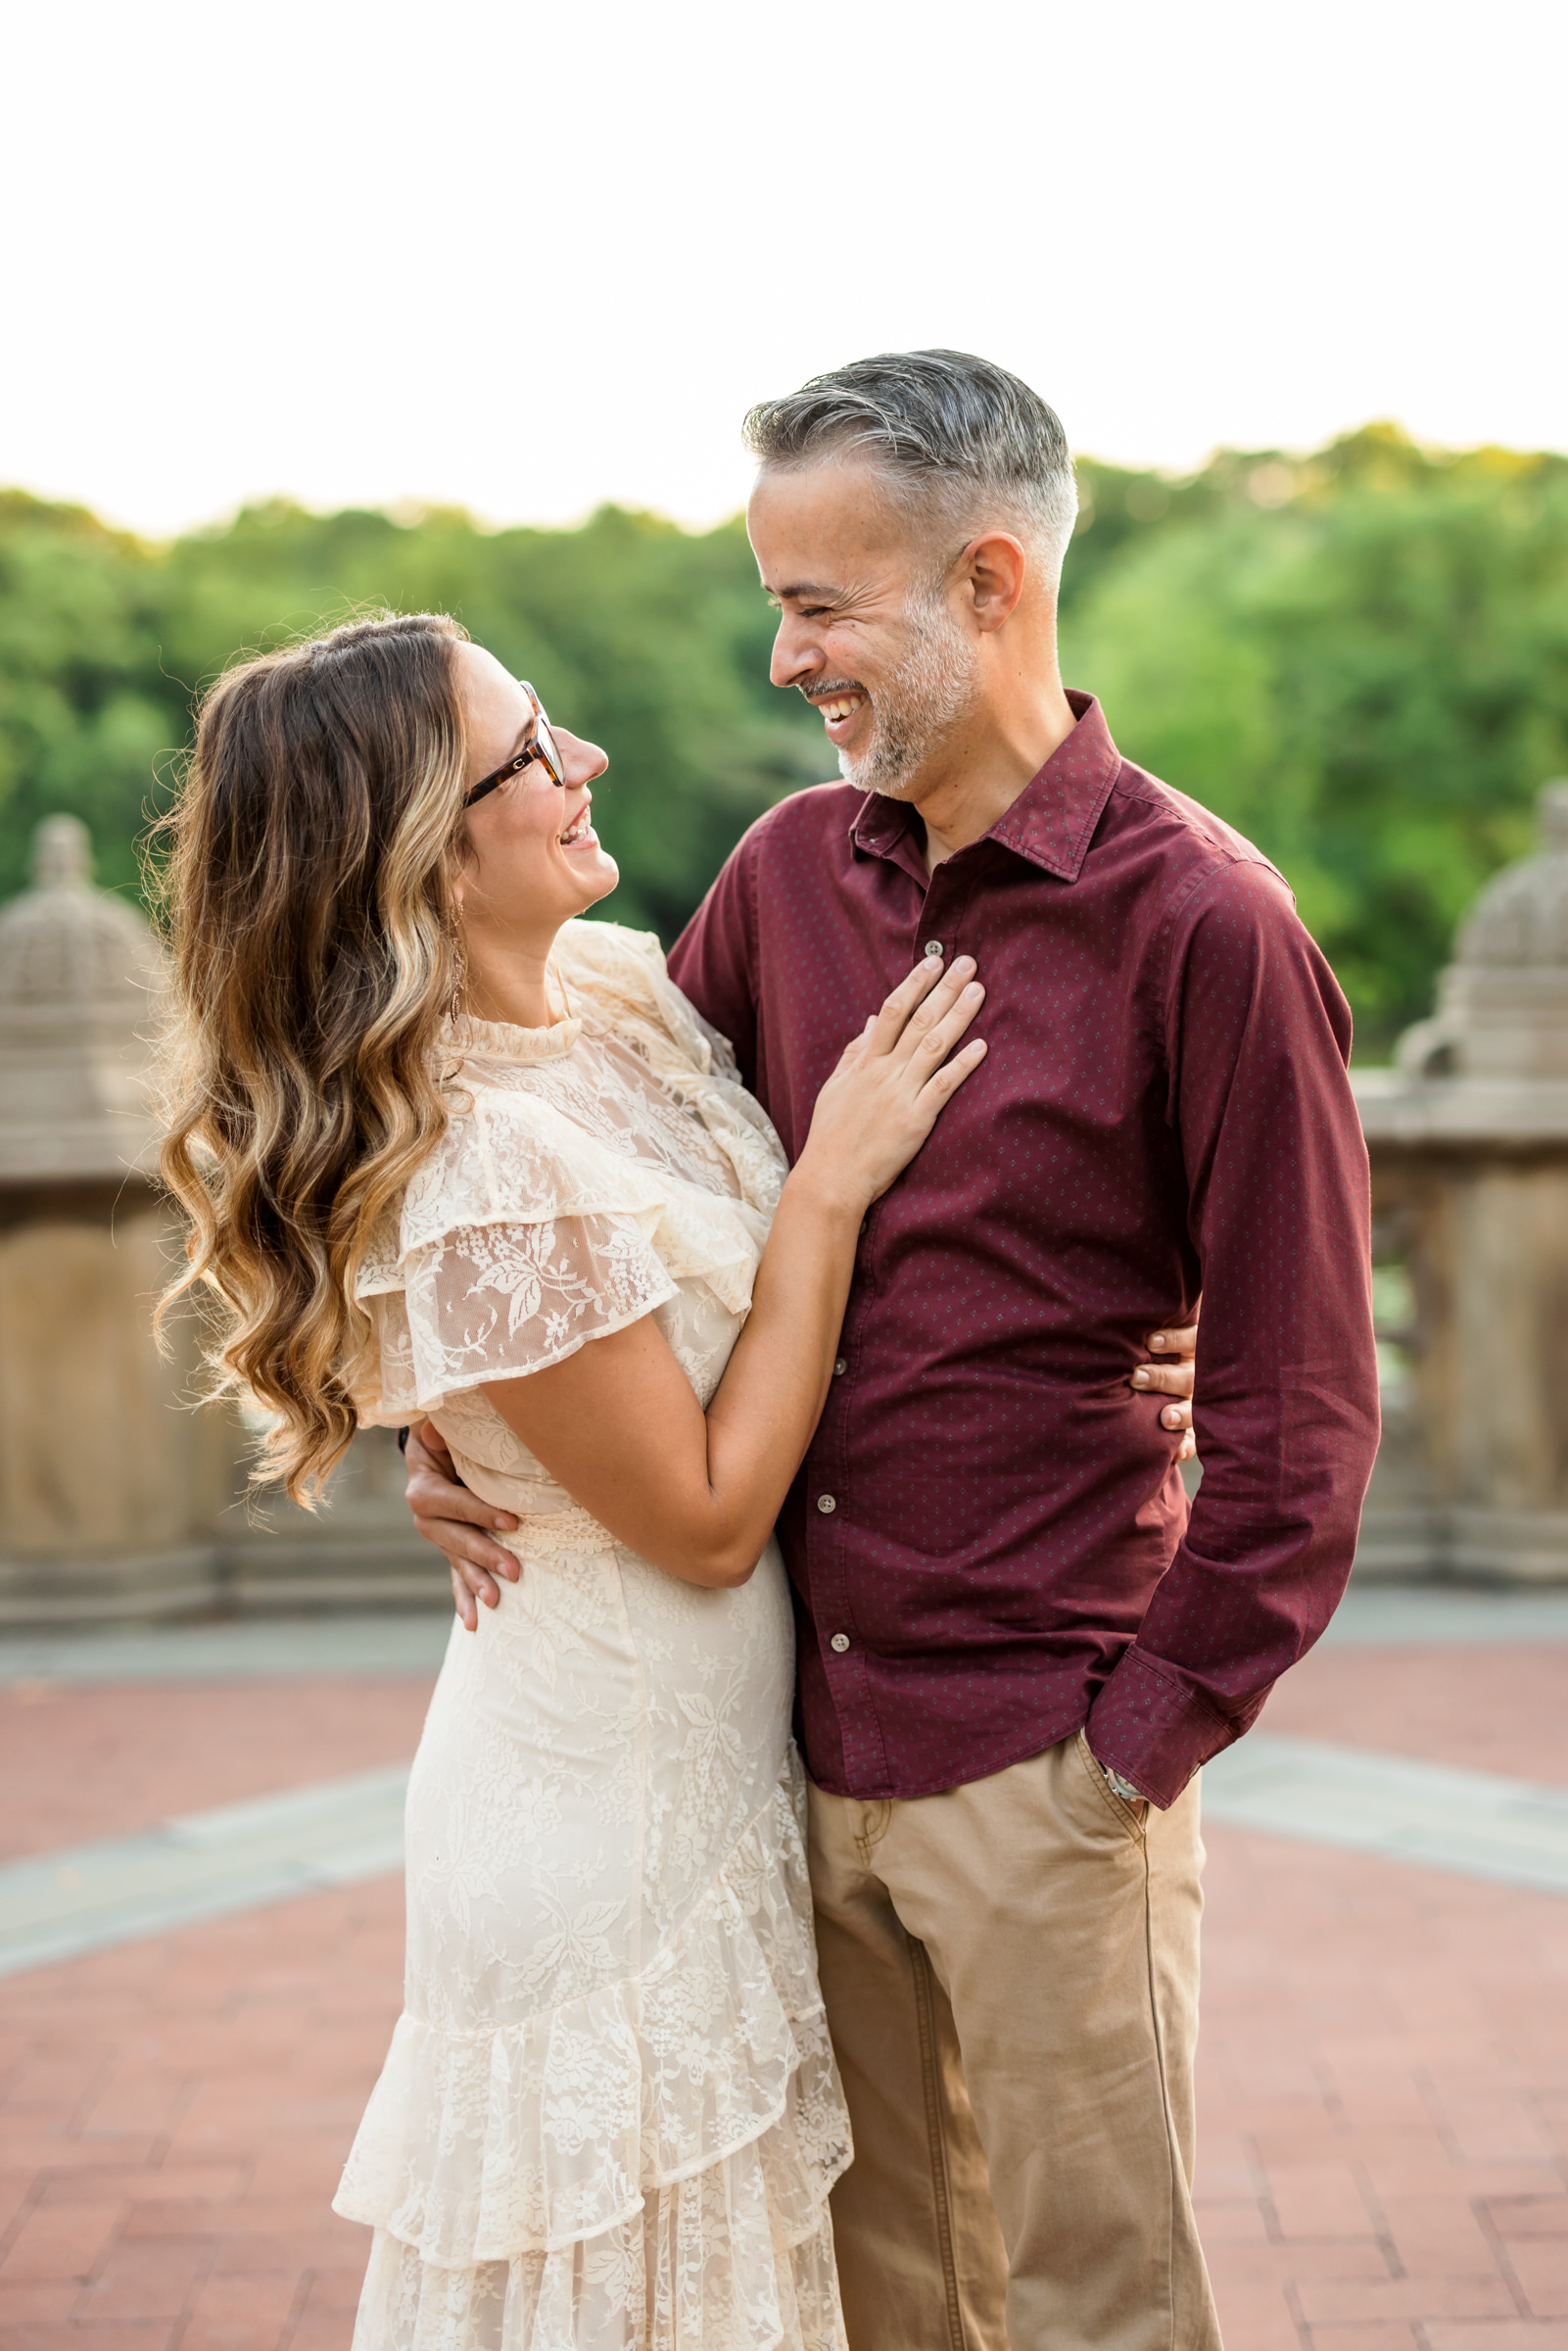 man and woman embracing and smiling at one another during couples photoshoot